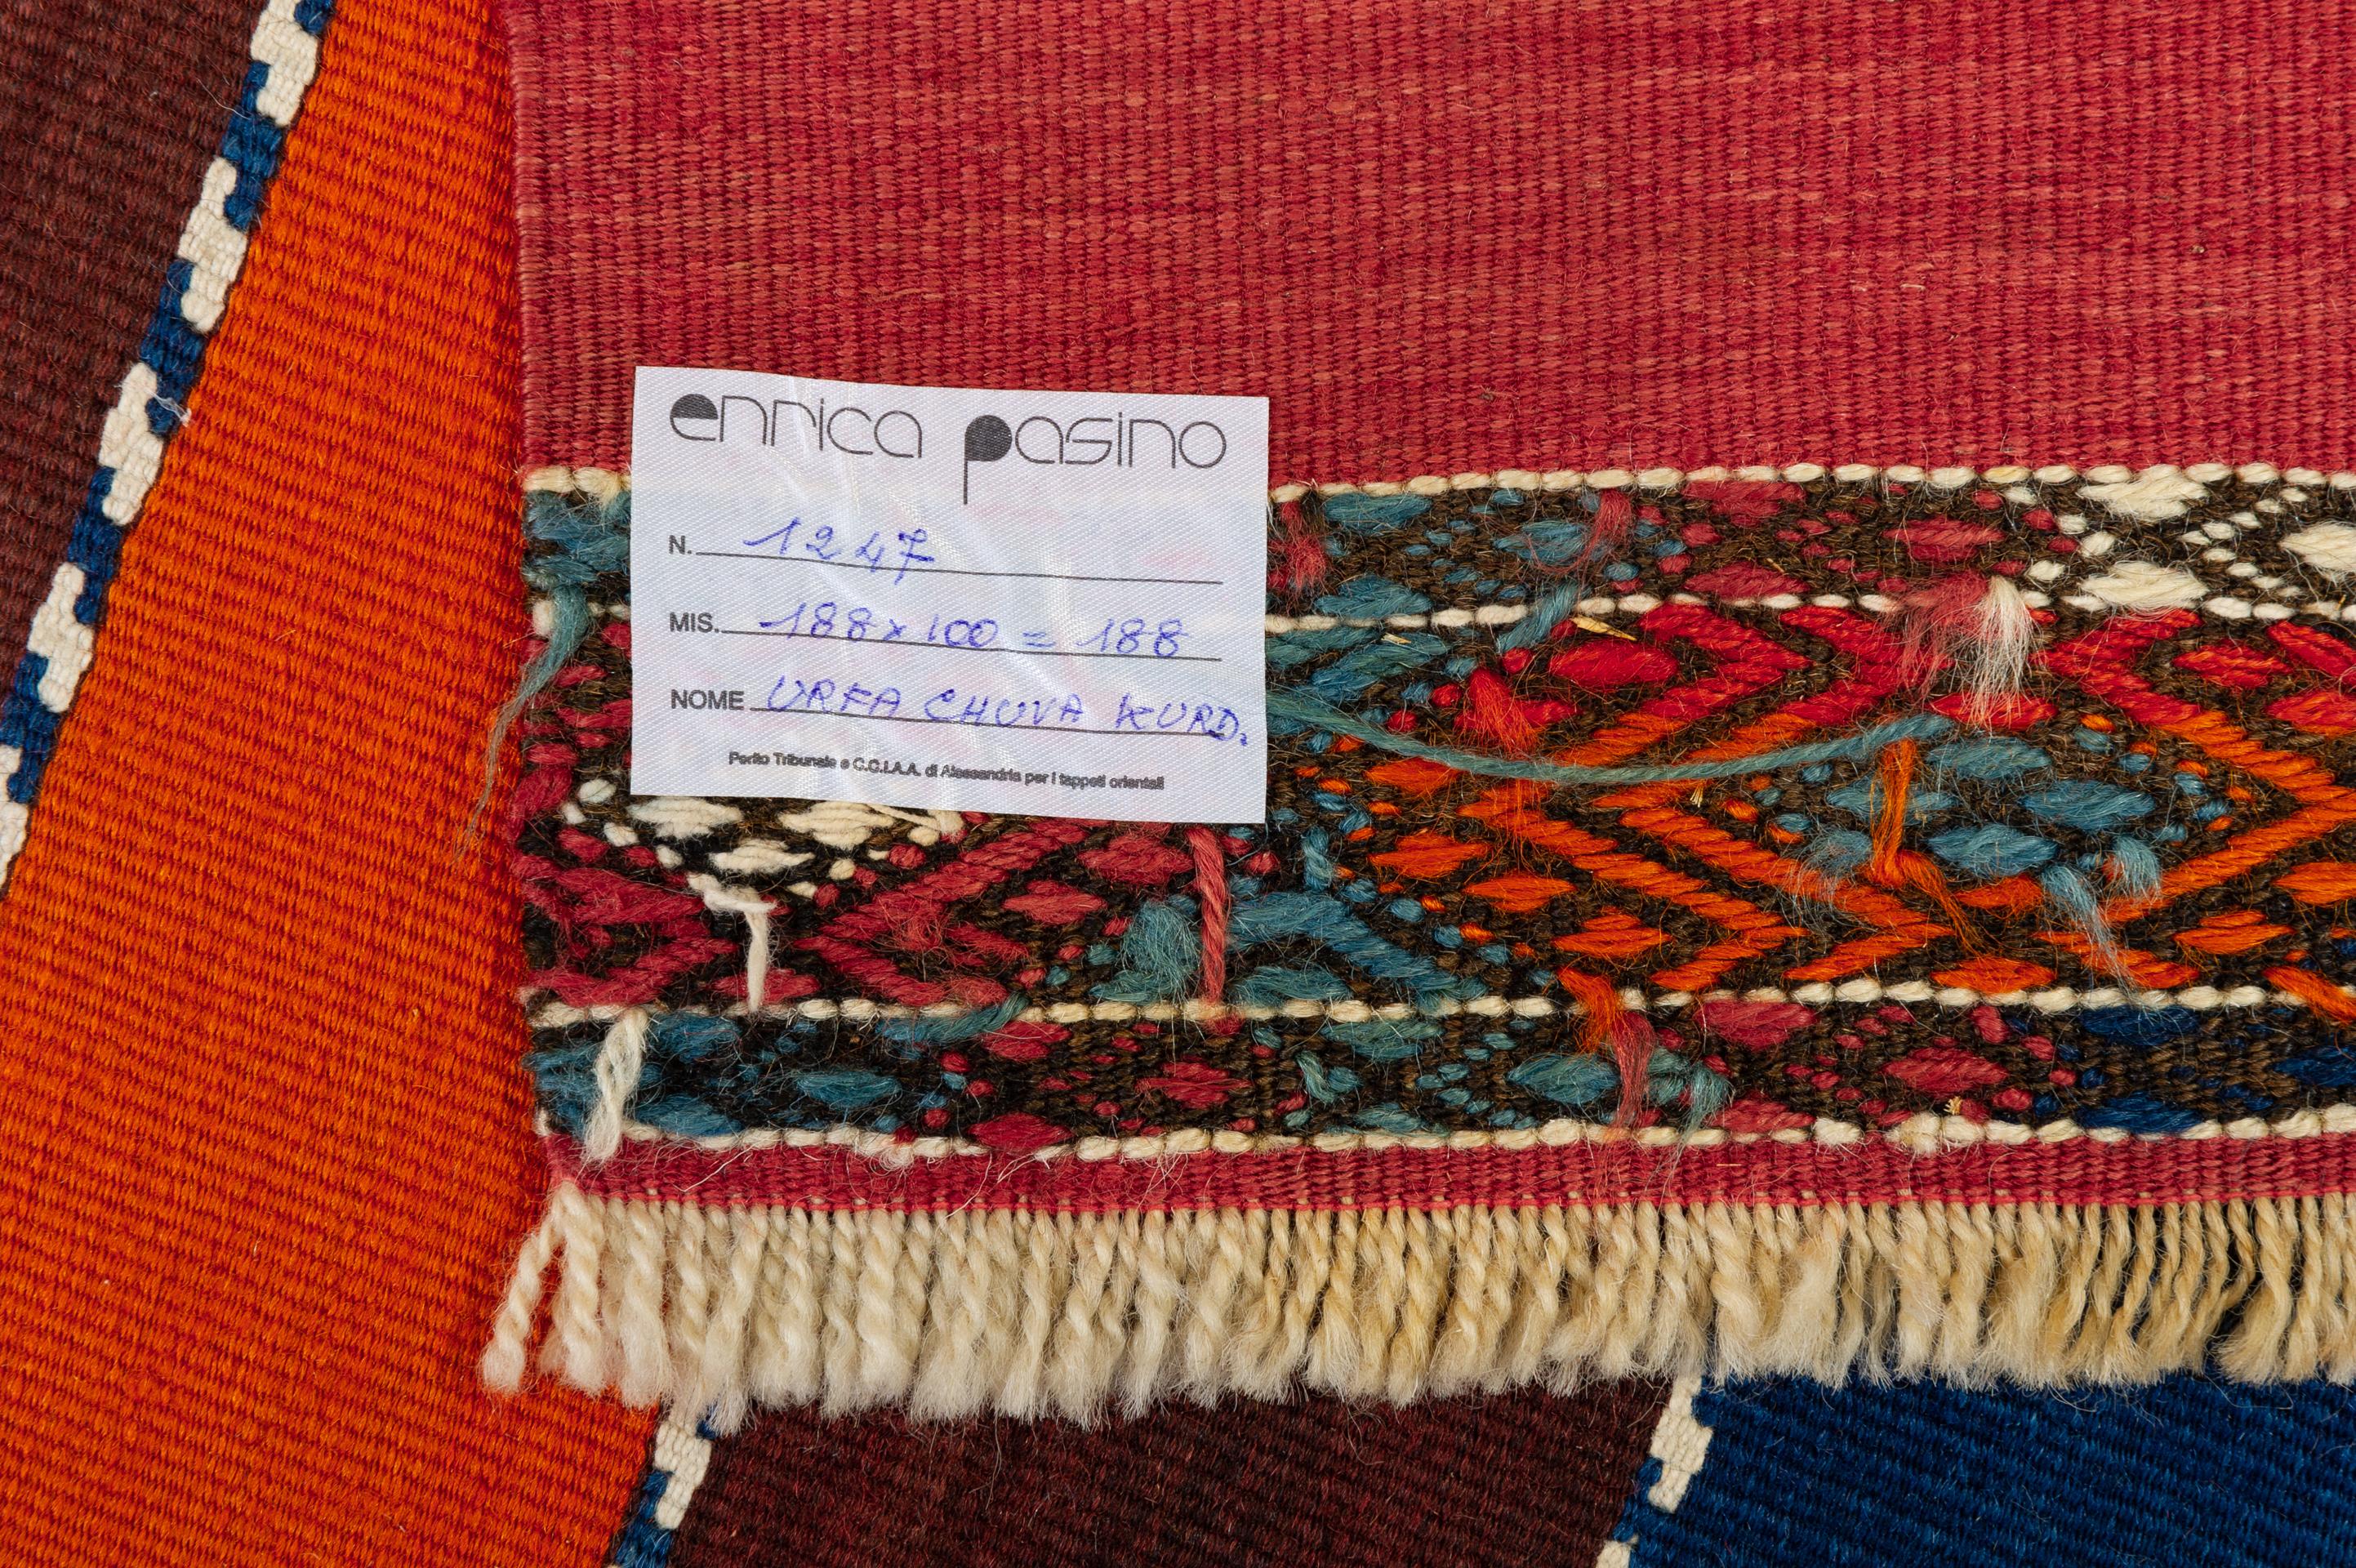 This artifact is very accurate, may be for internal use, not for export. The bright colors are typical of the nomadic products. The embroidered lines that embellish it are interesting: wool dyed with natural substances, including madder red and